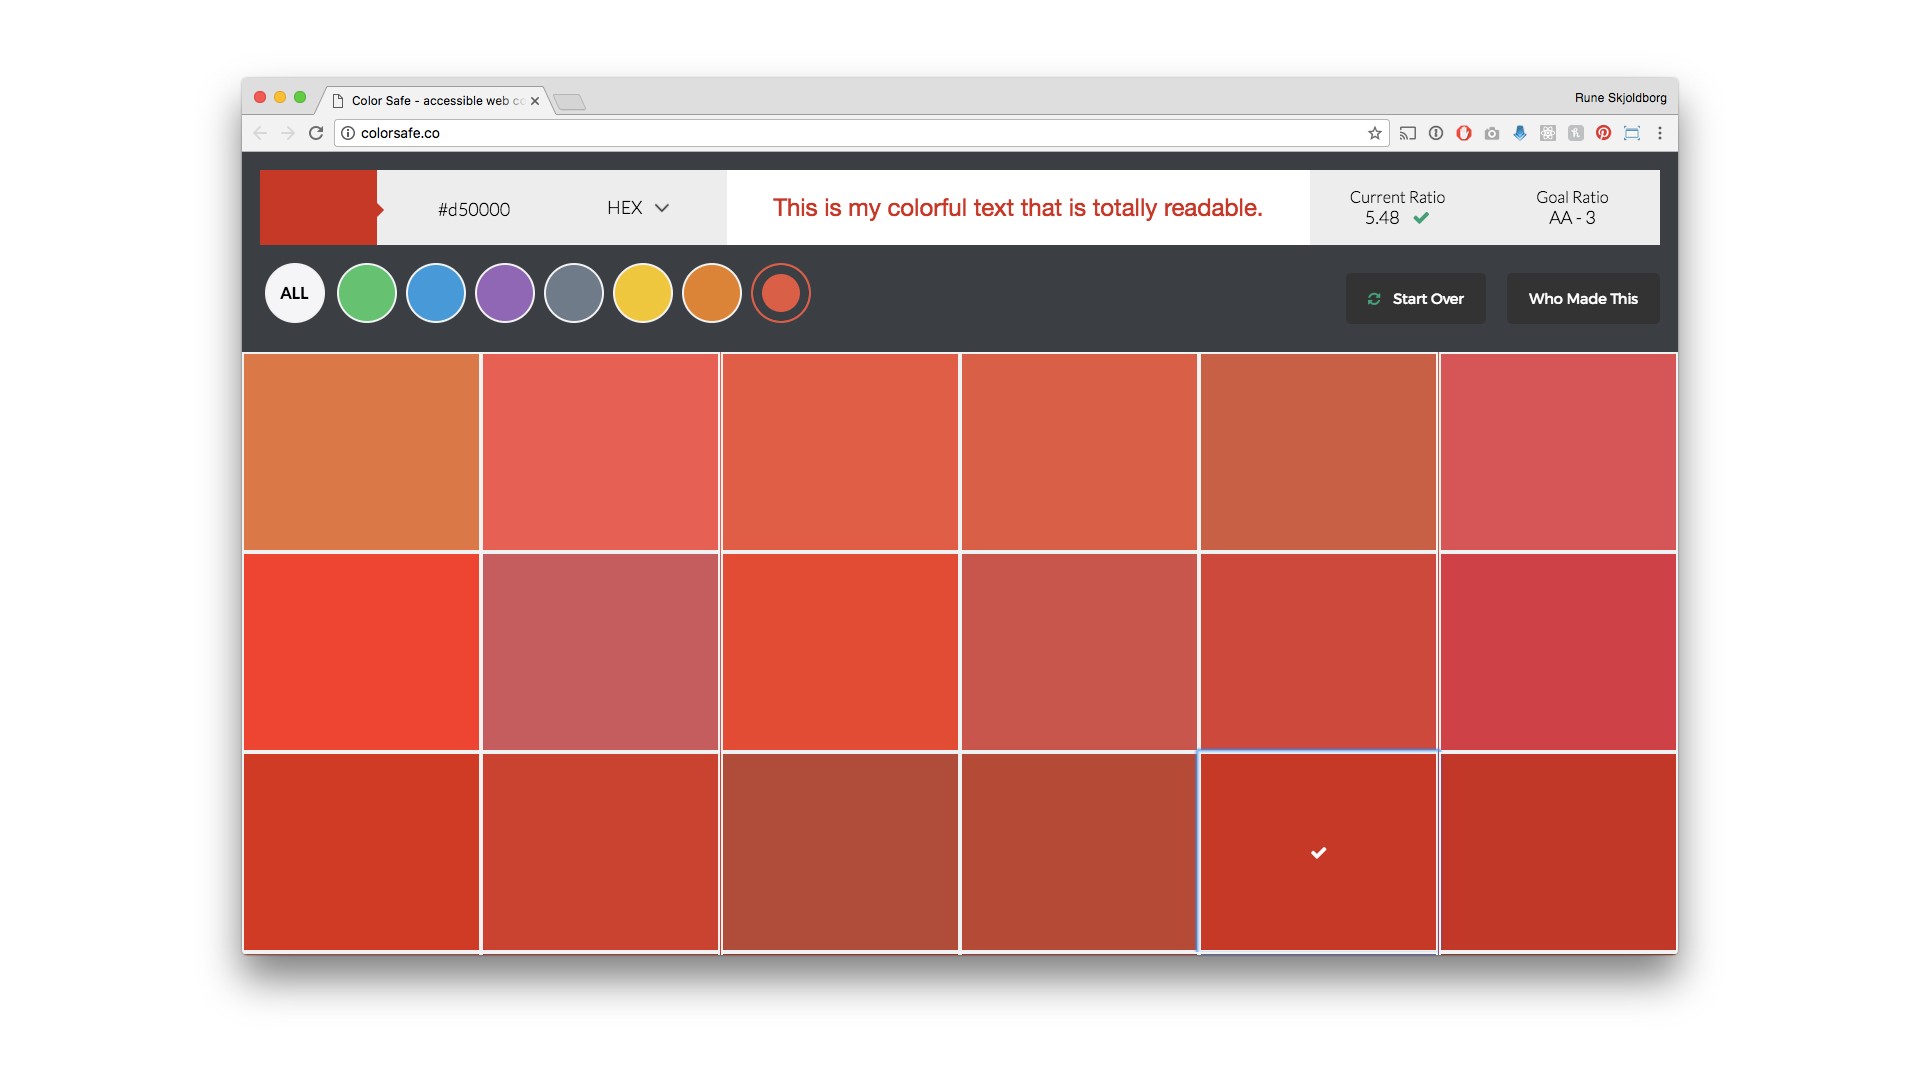 Colorsafe.co site that shows multiple shades of red that are readable against white text.